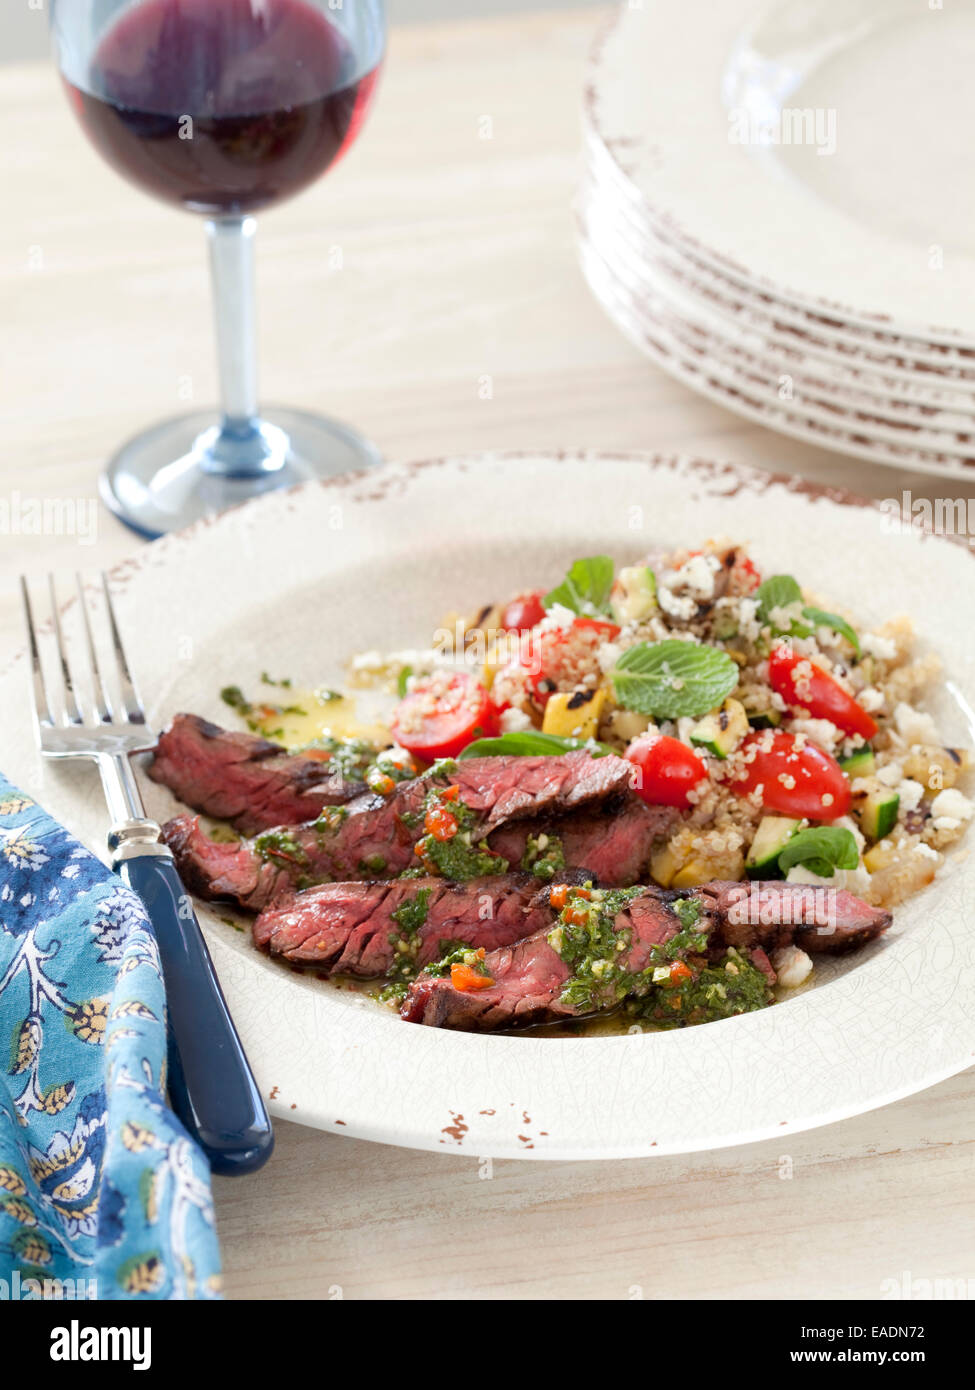 Grilled Beef and Couscous salad with glass of red wine. Stock Photo